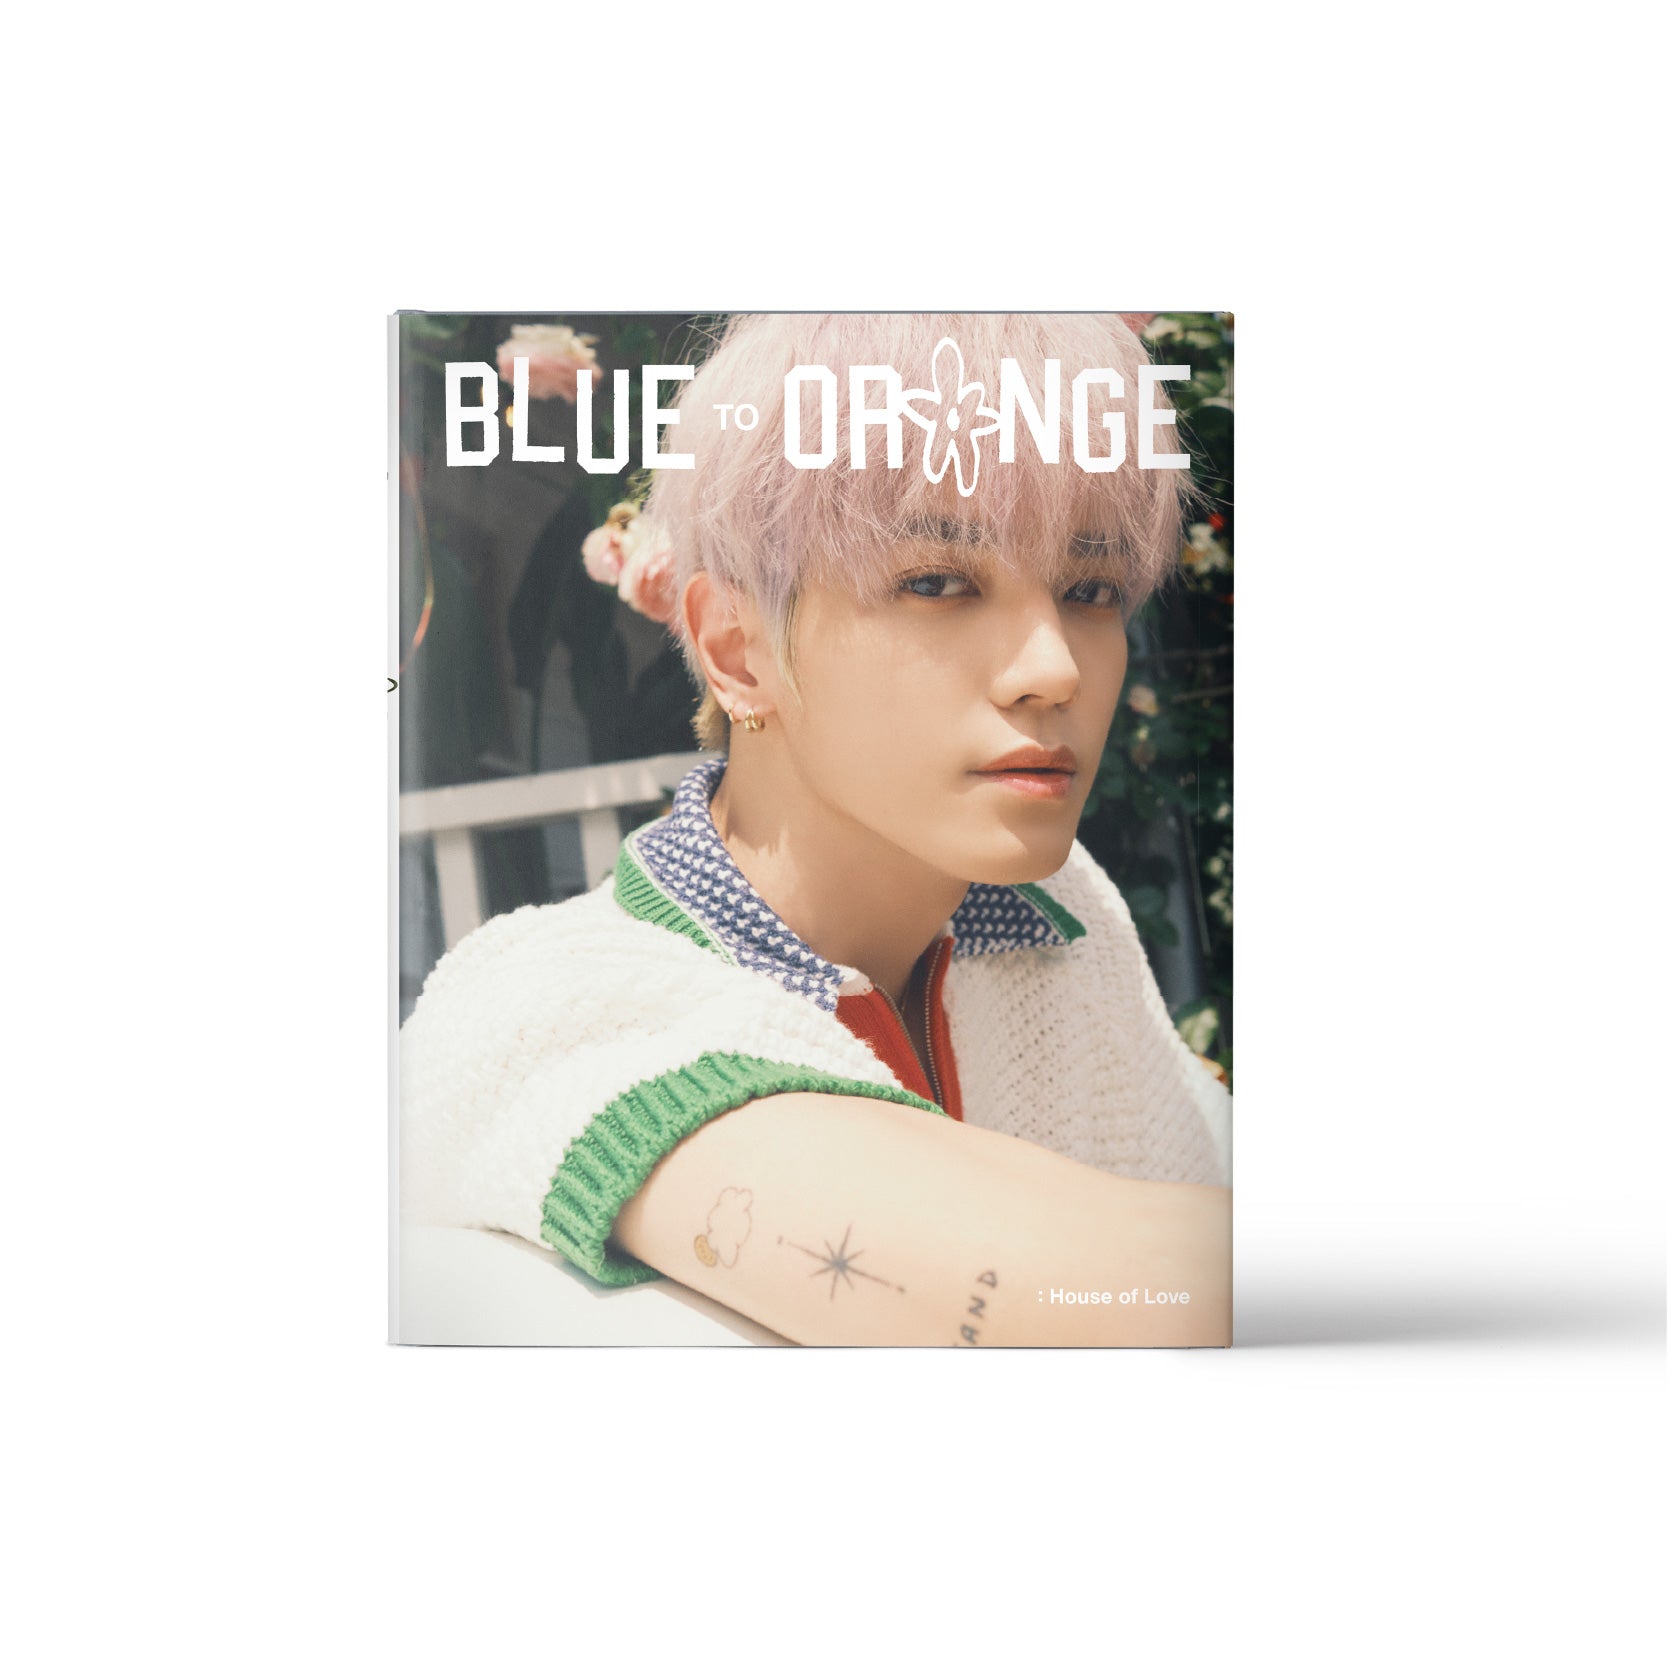 NCT 127 PHOTOBOOK 'BLUE TO ORANGE : HOUSE OF LOVE' TAEYONG VERSION COVER